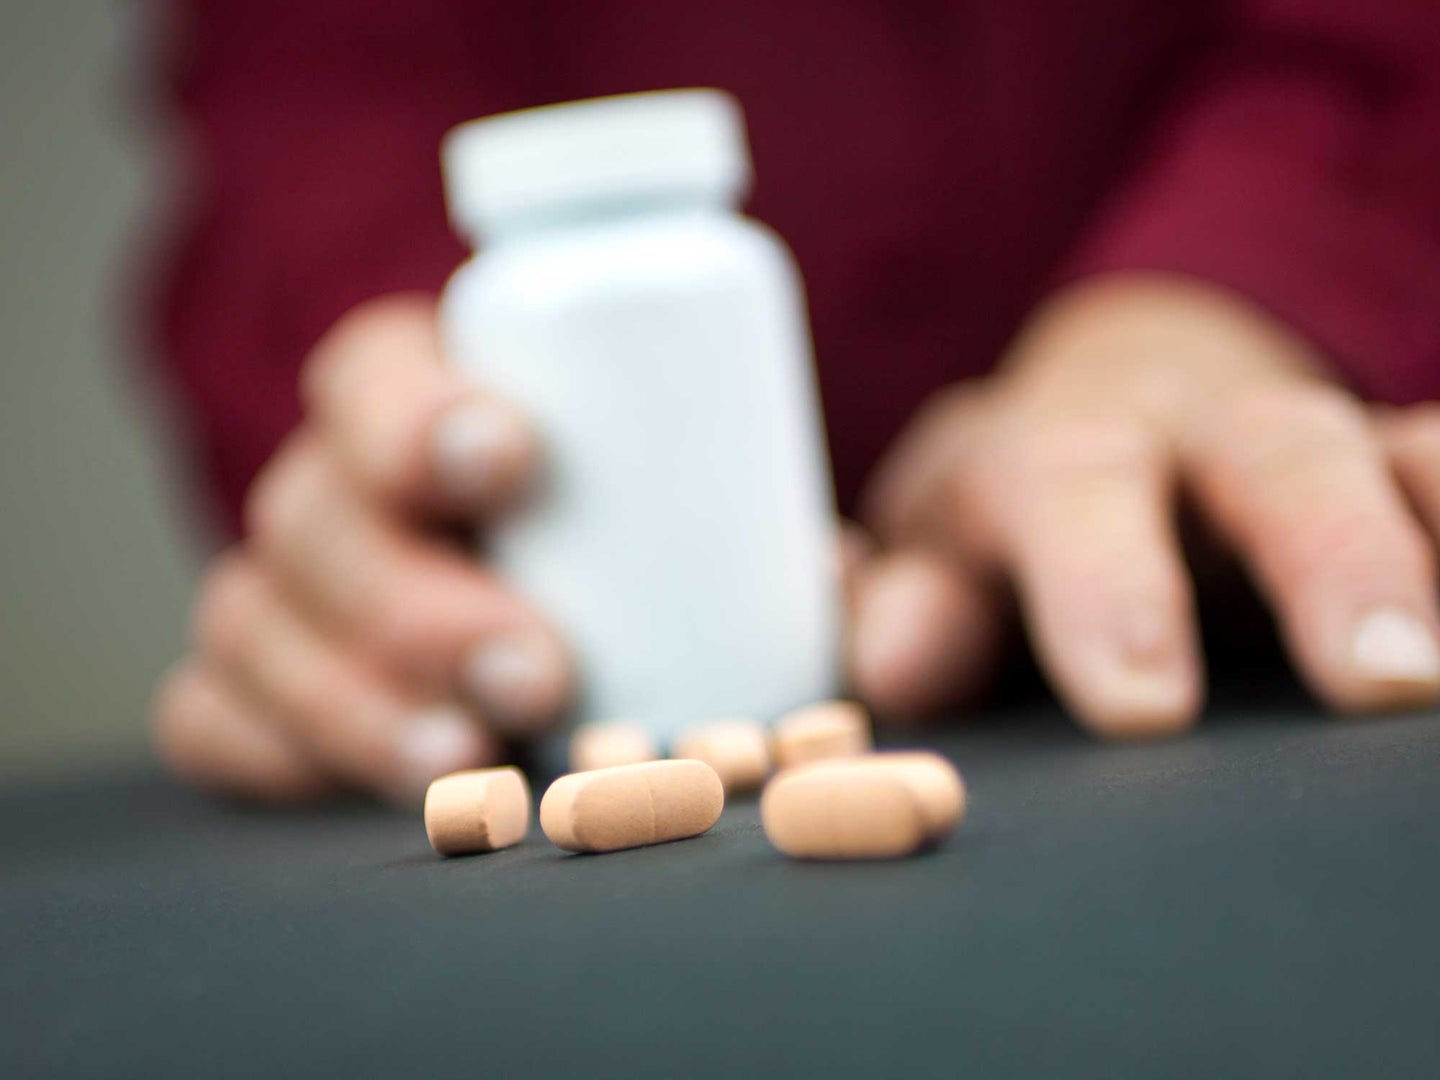 Hands holding a box of pills, pills in the foreground and the background is out of focus.